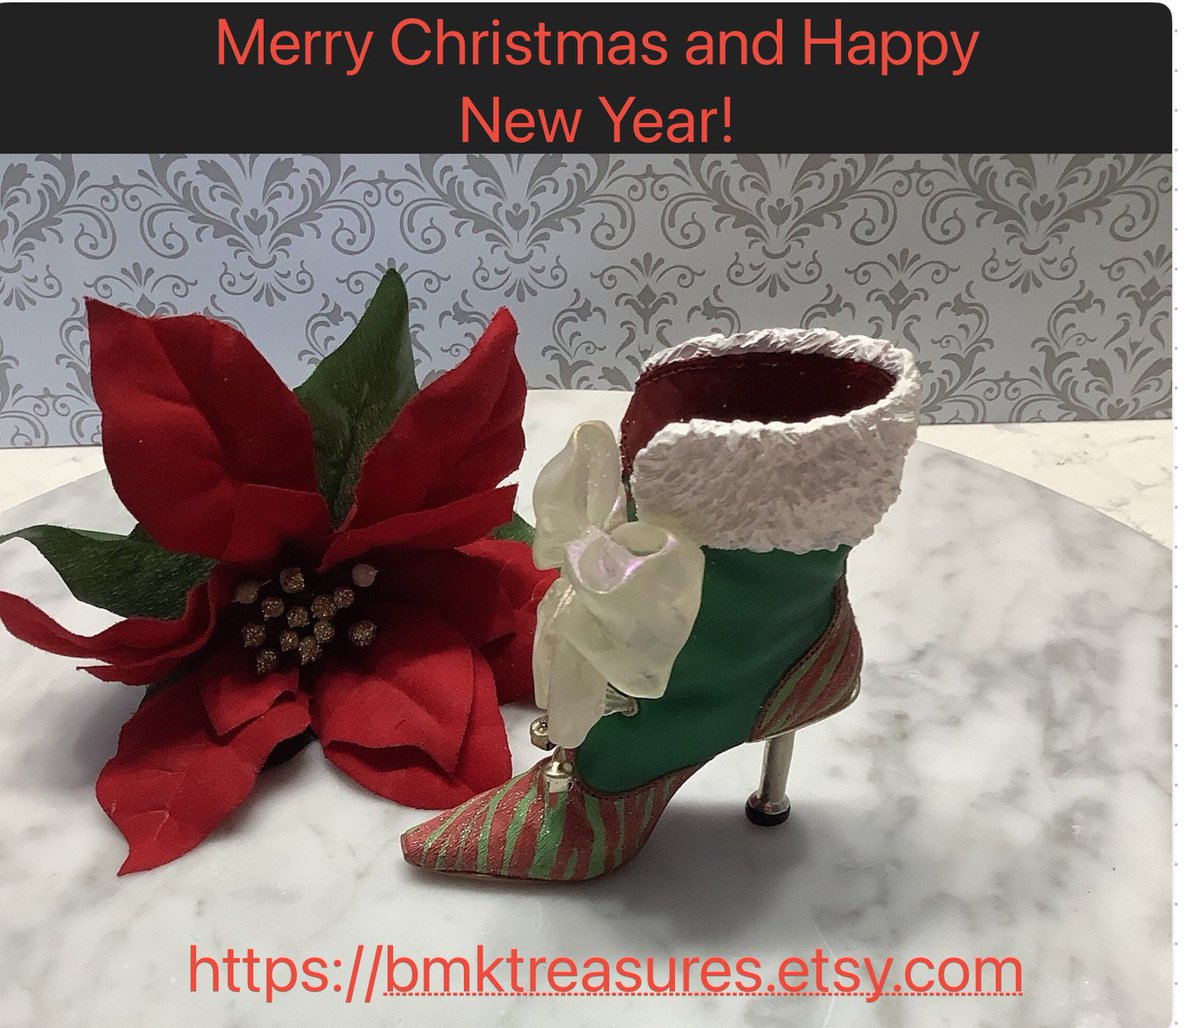 Thank you to all of my wonderful customers for a great holiday season! Enjoy this magical time with your loved ones!  #merrychristmas #thankyou #etsyshops #smallbusiness #holidays #happyholidays #gratitude #greatful